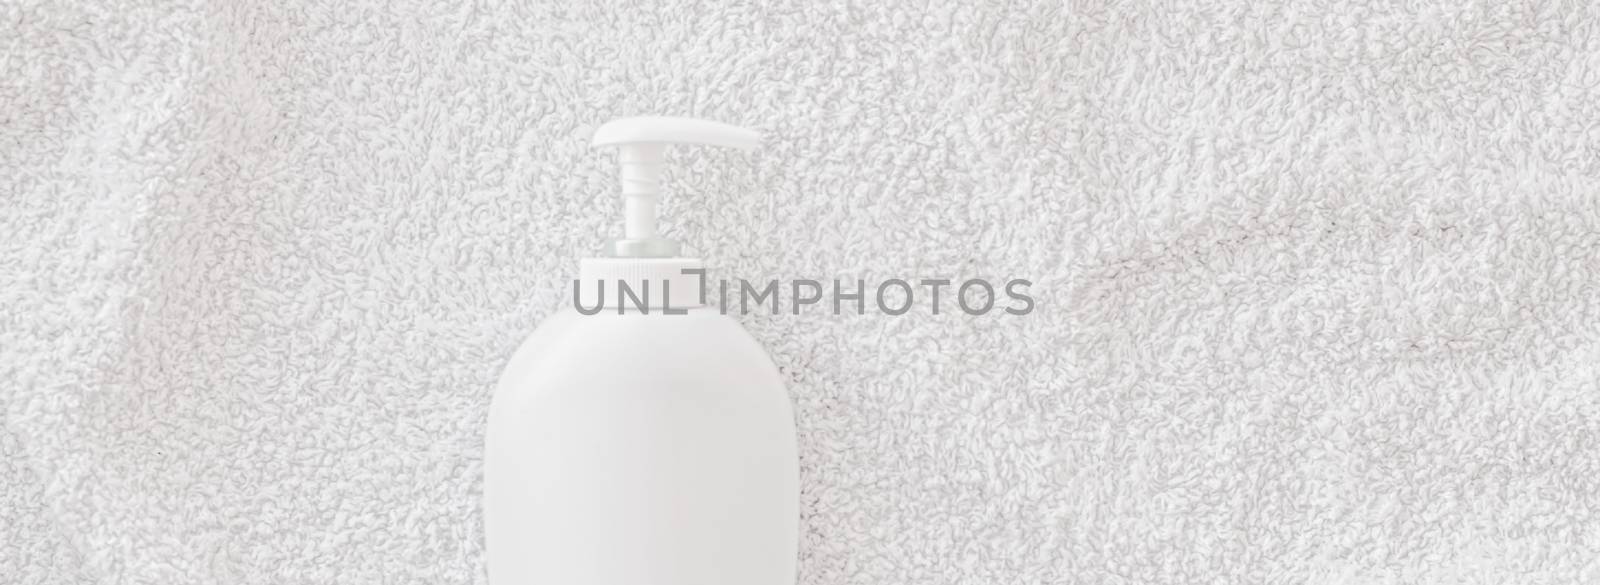 Blank label cosmetic container bottle as product mockup on white towel background by Anneleven